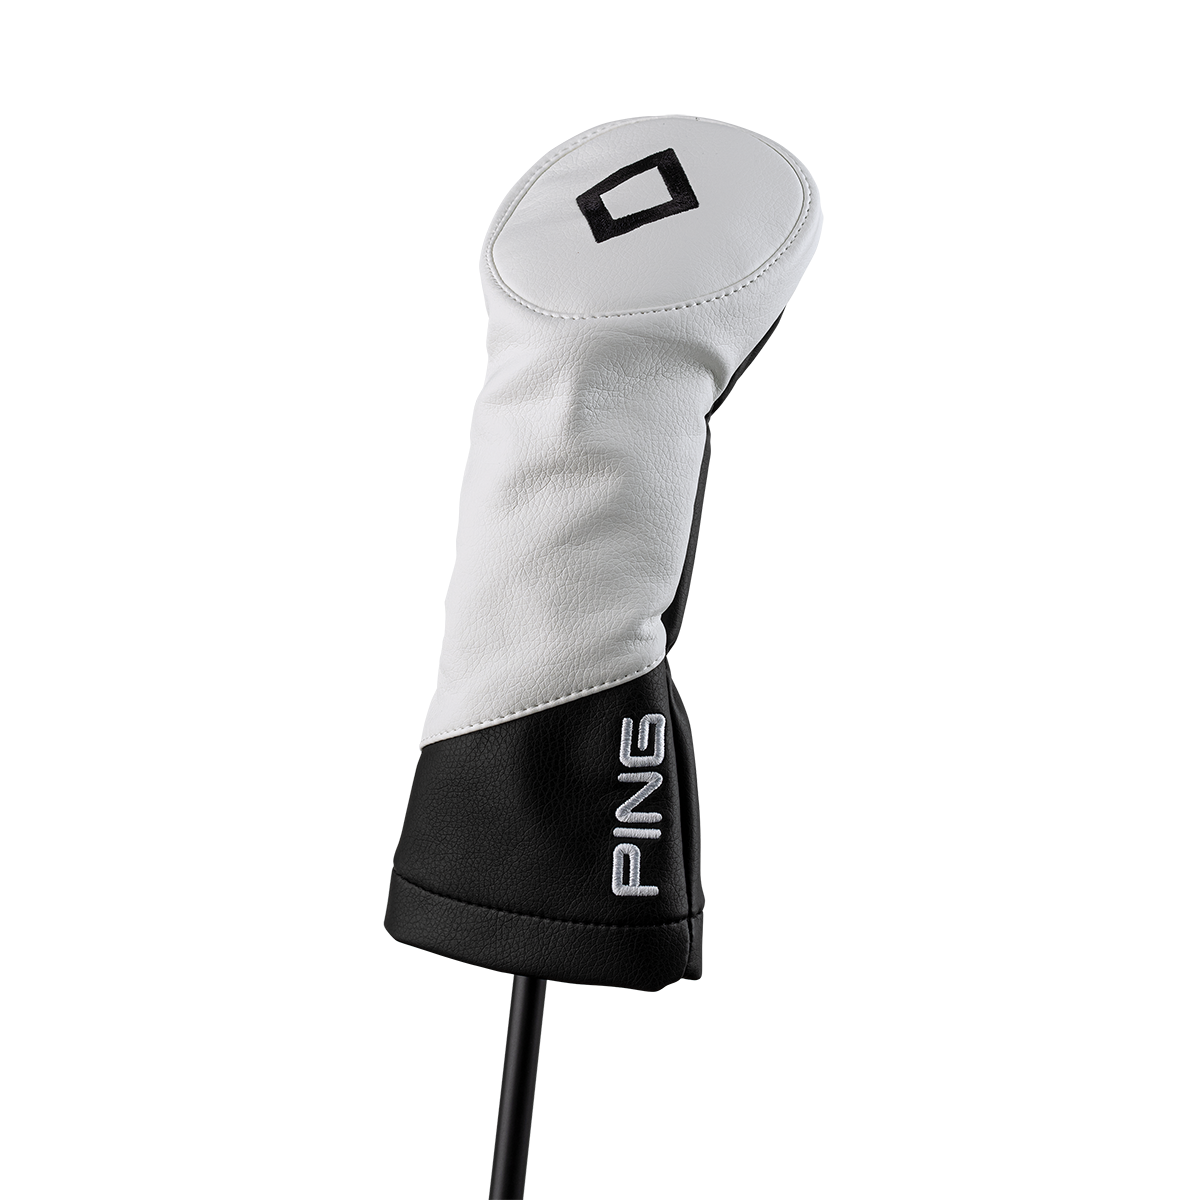 Ping Core Fairway Headcover Pga Tour Superstore 